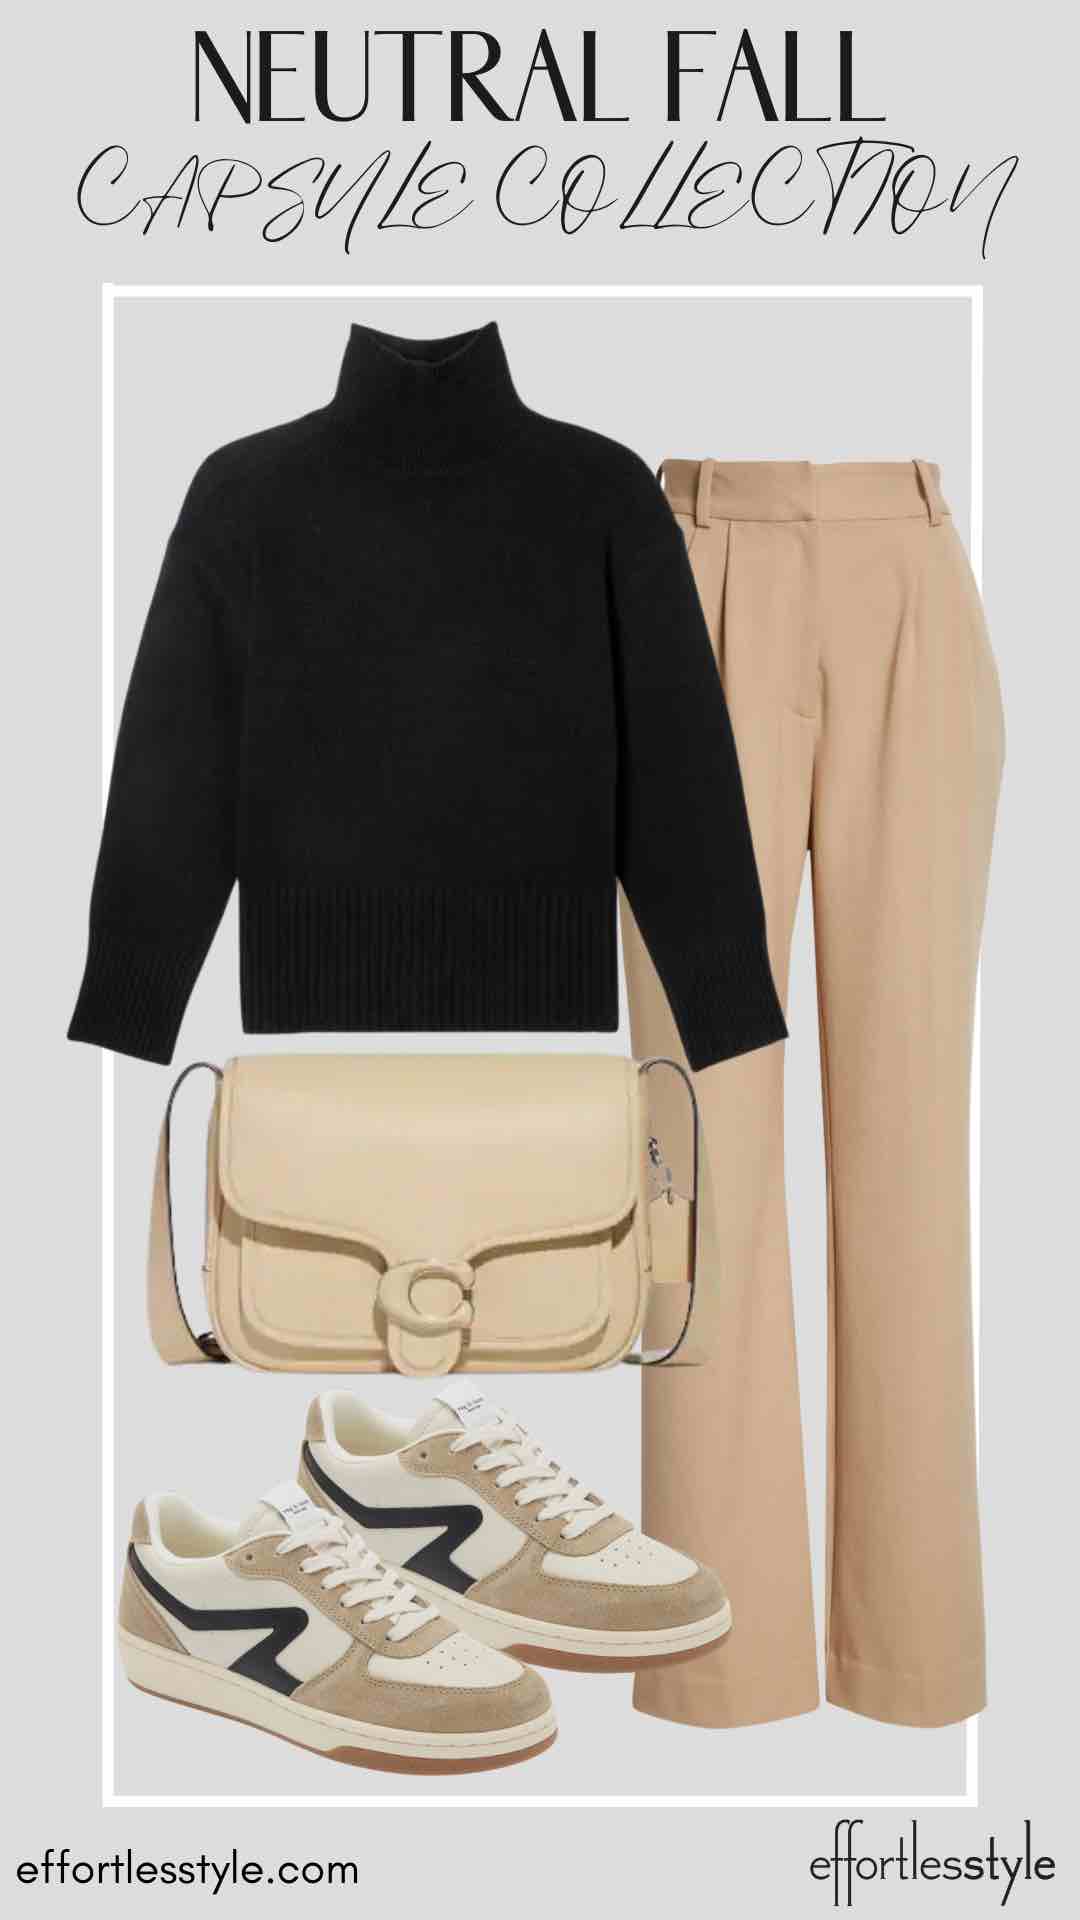 How To Wear Our Neutral Fall Capsule Wardrobe - Part 1 Turtleneck Sweater & Trousers how to wear beige and black together how to wear sneakers with trousers travel style inspiration for fall what to wear for travel this fall the best fall accessories how to wear brown and black together dressy casual fall style inspiration